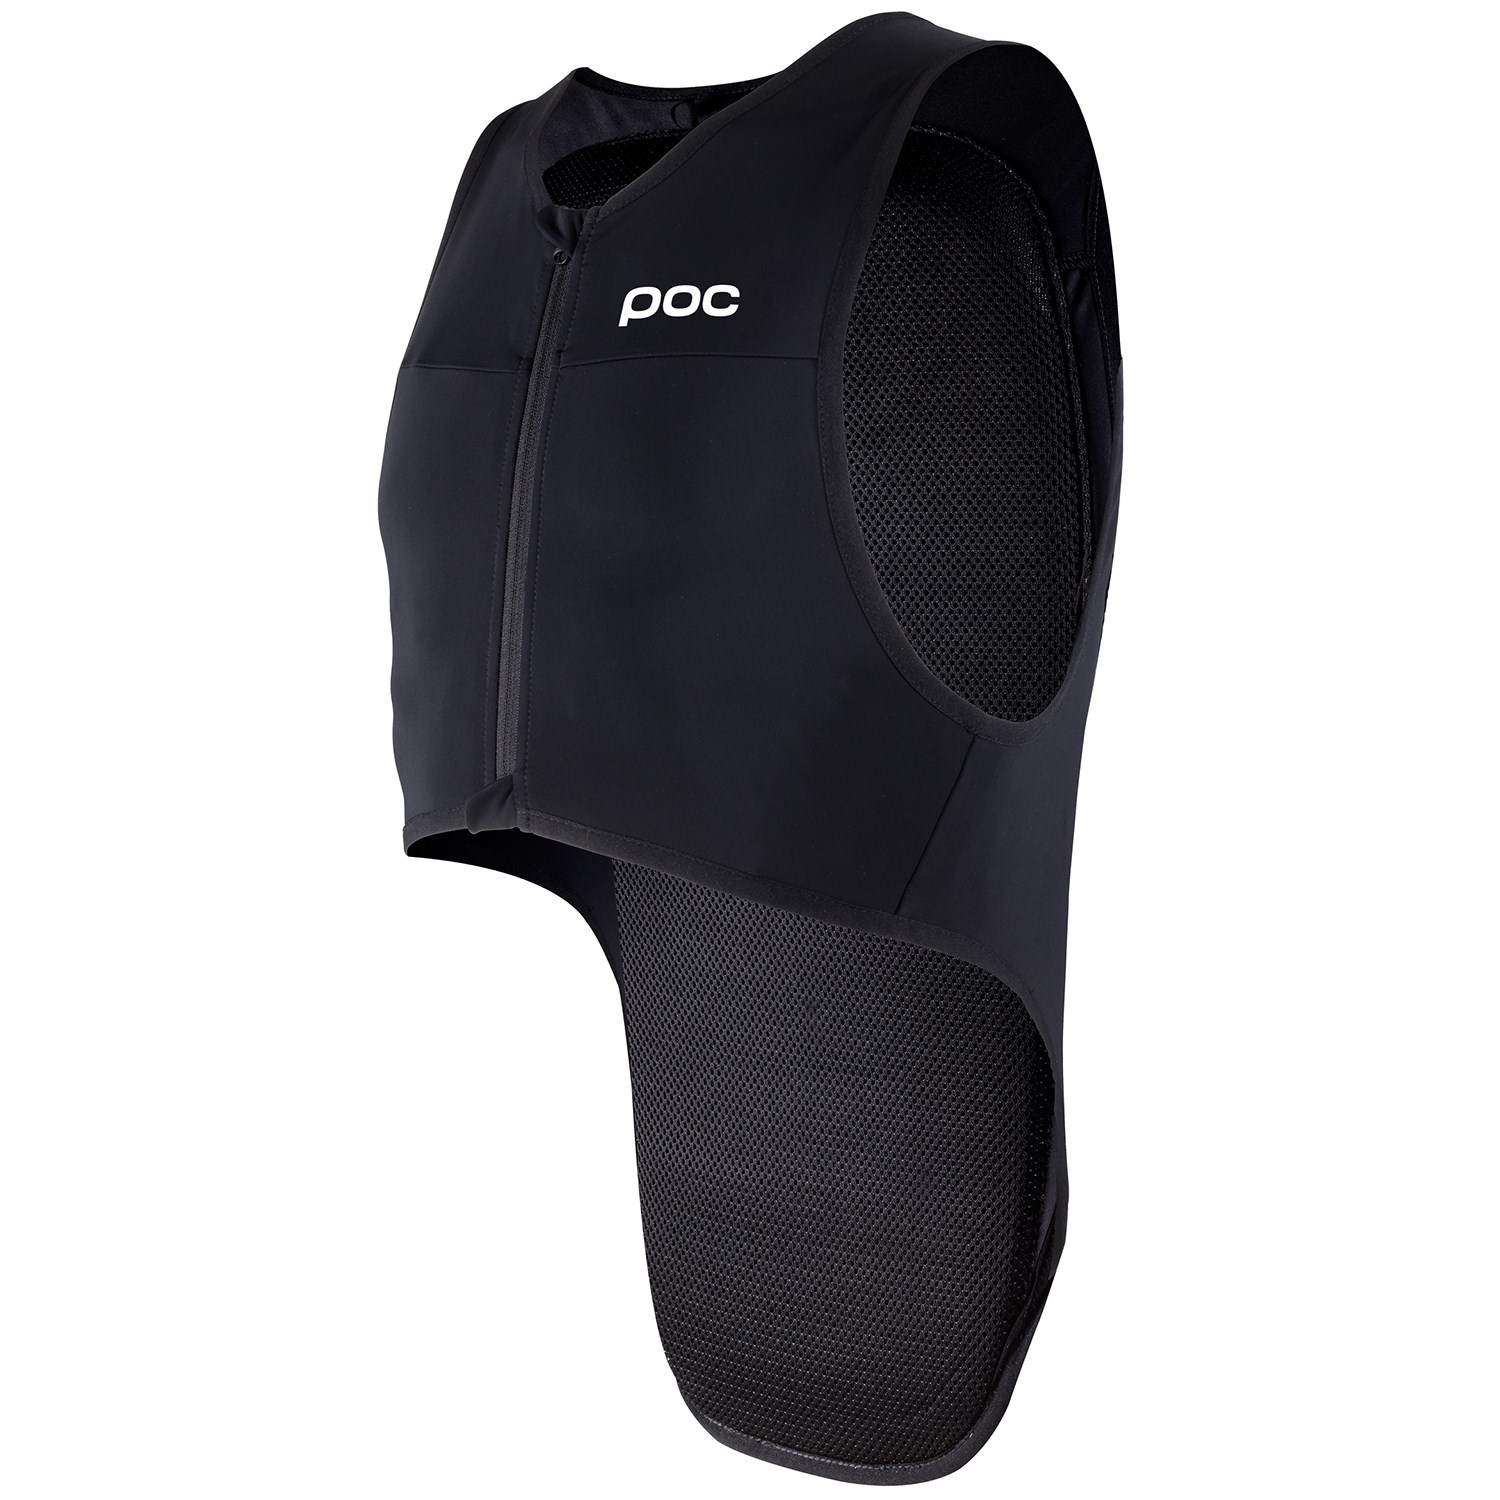 POC Skiing Armor for Men and Women VPD Air Comp Jacket 